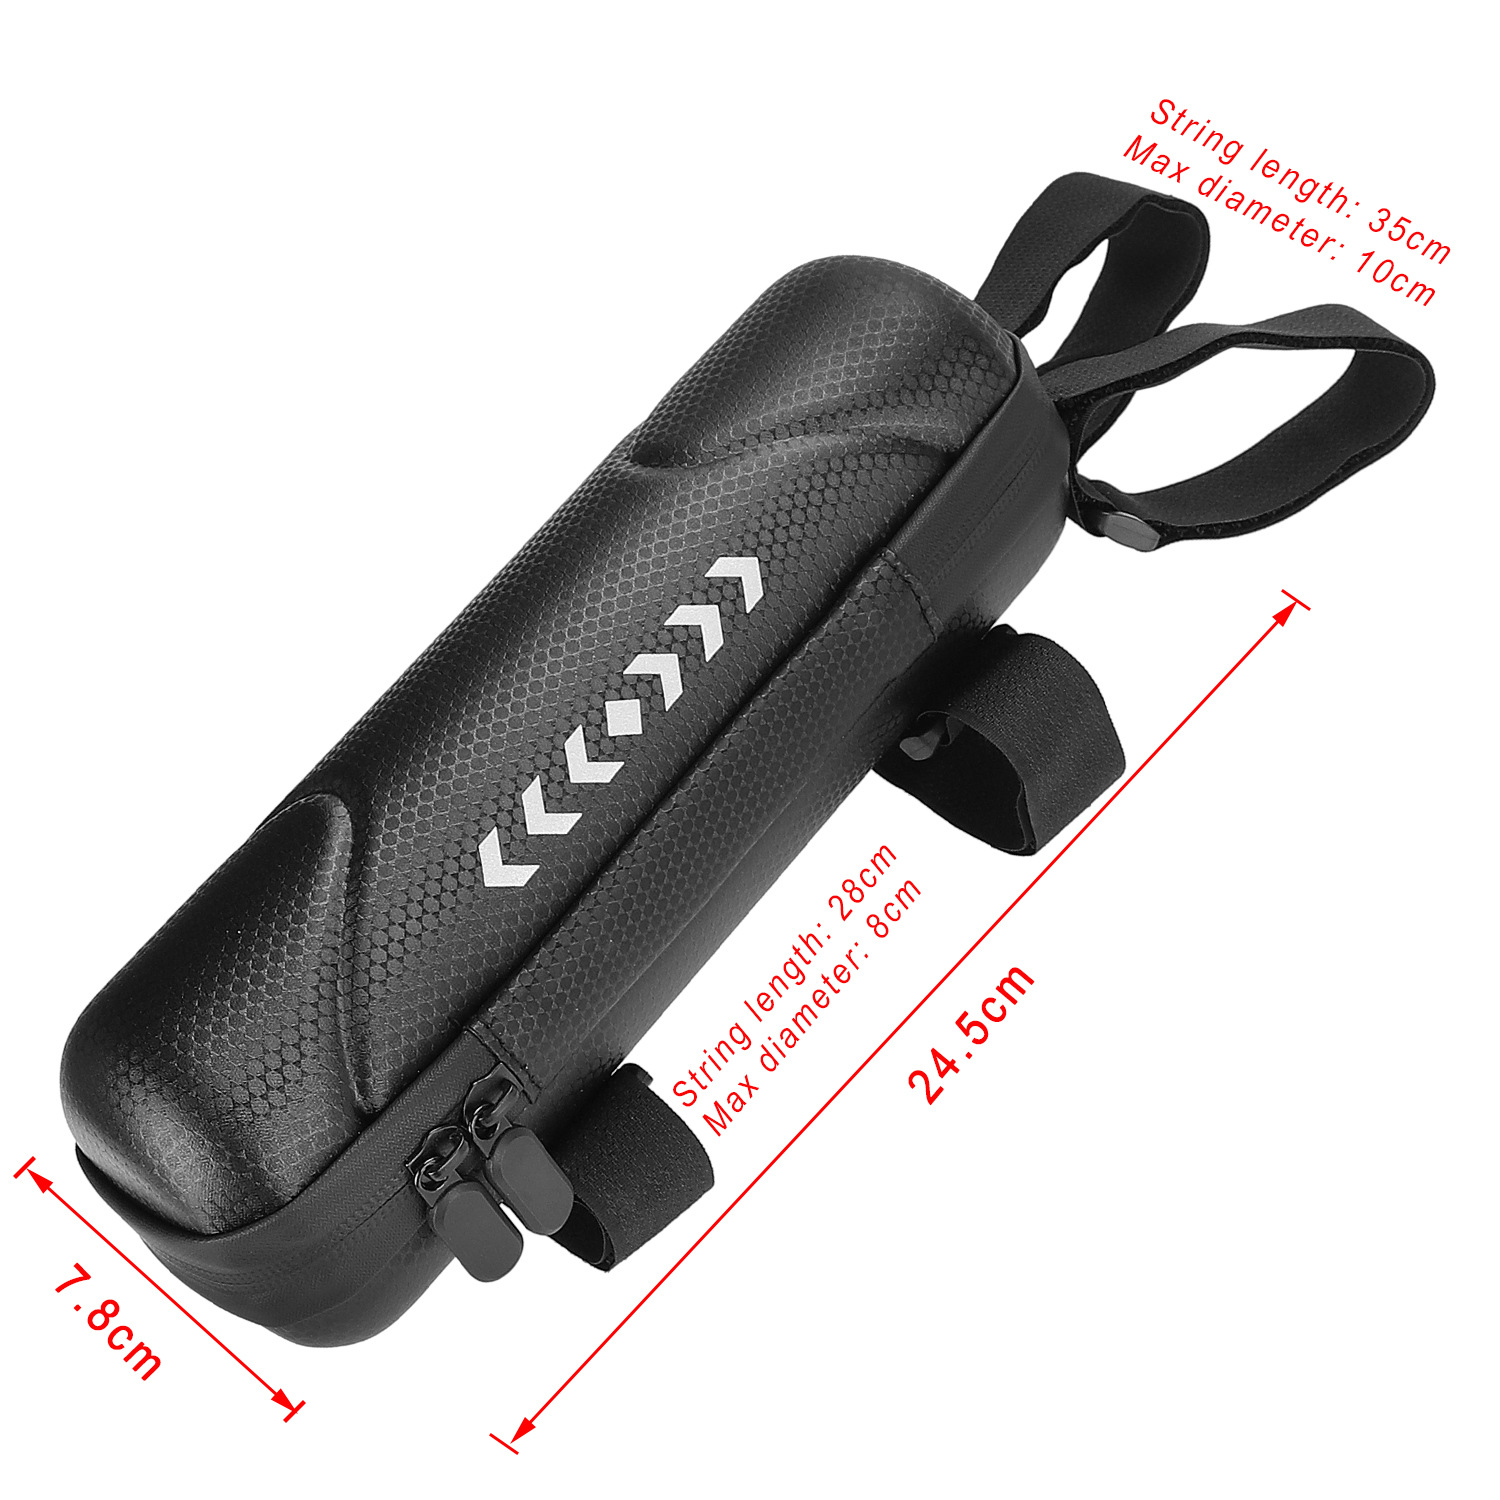 1L Kettle Bag Toolkit Bag for XIAOMI Electric Scooter Waterproof Front Bag Hard Shell Bike Bag